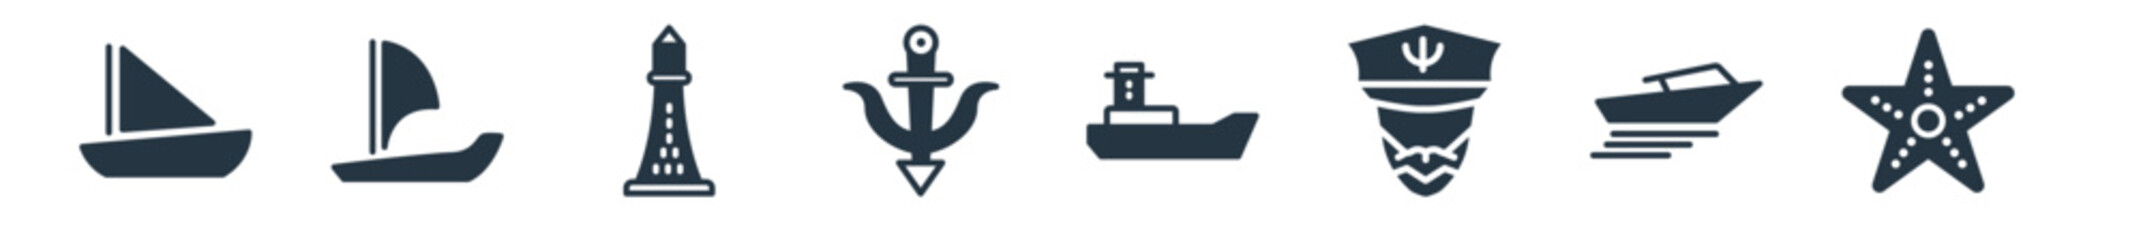 nautical filled icons. glyph vector icons such as starfish with dots, speedboat, ship admiral, scow, marine, smeaton's tower?, windsail sign isolated on white background.